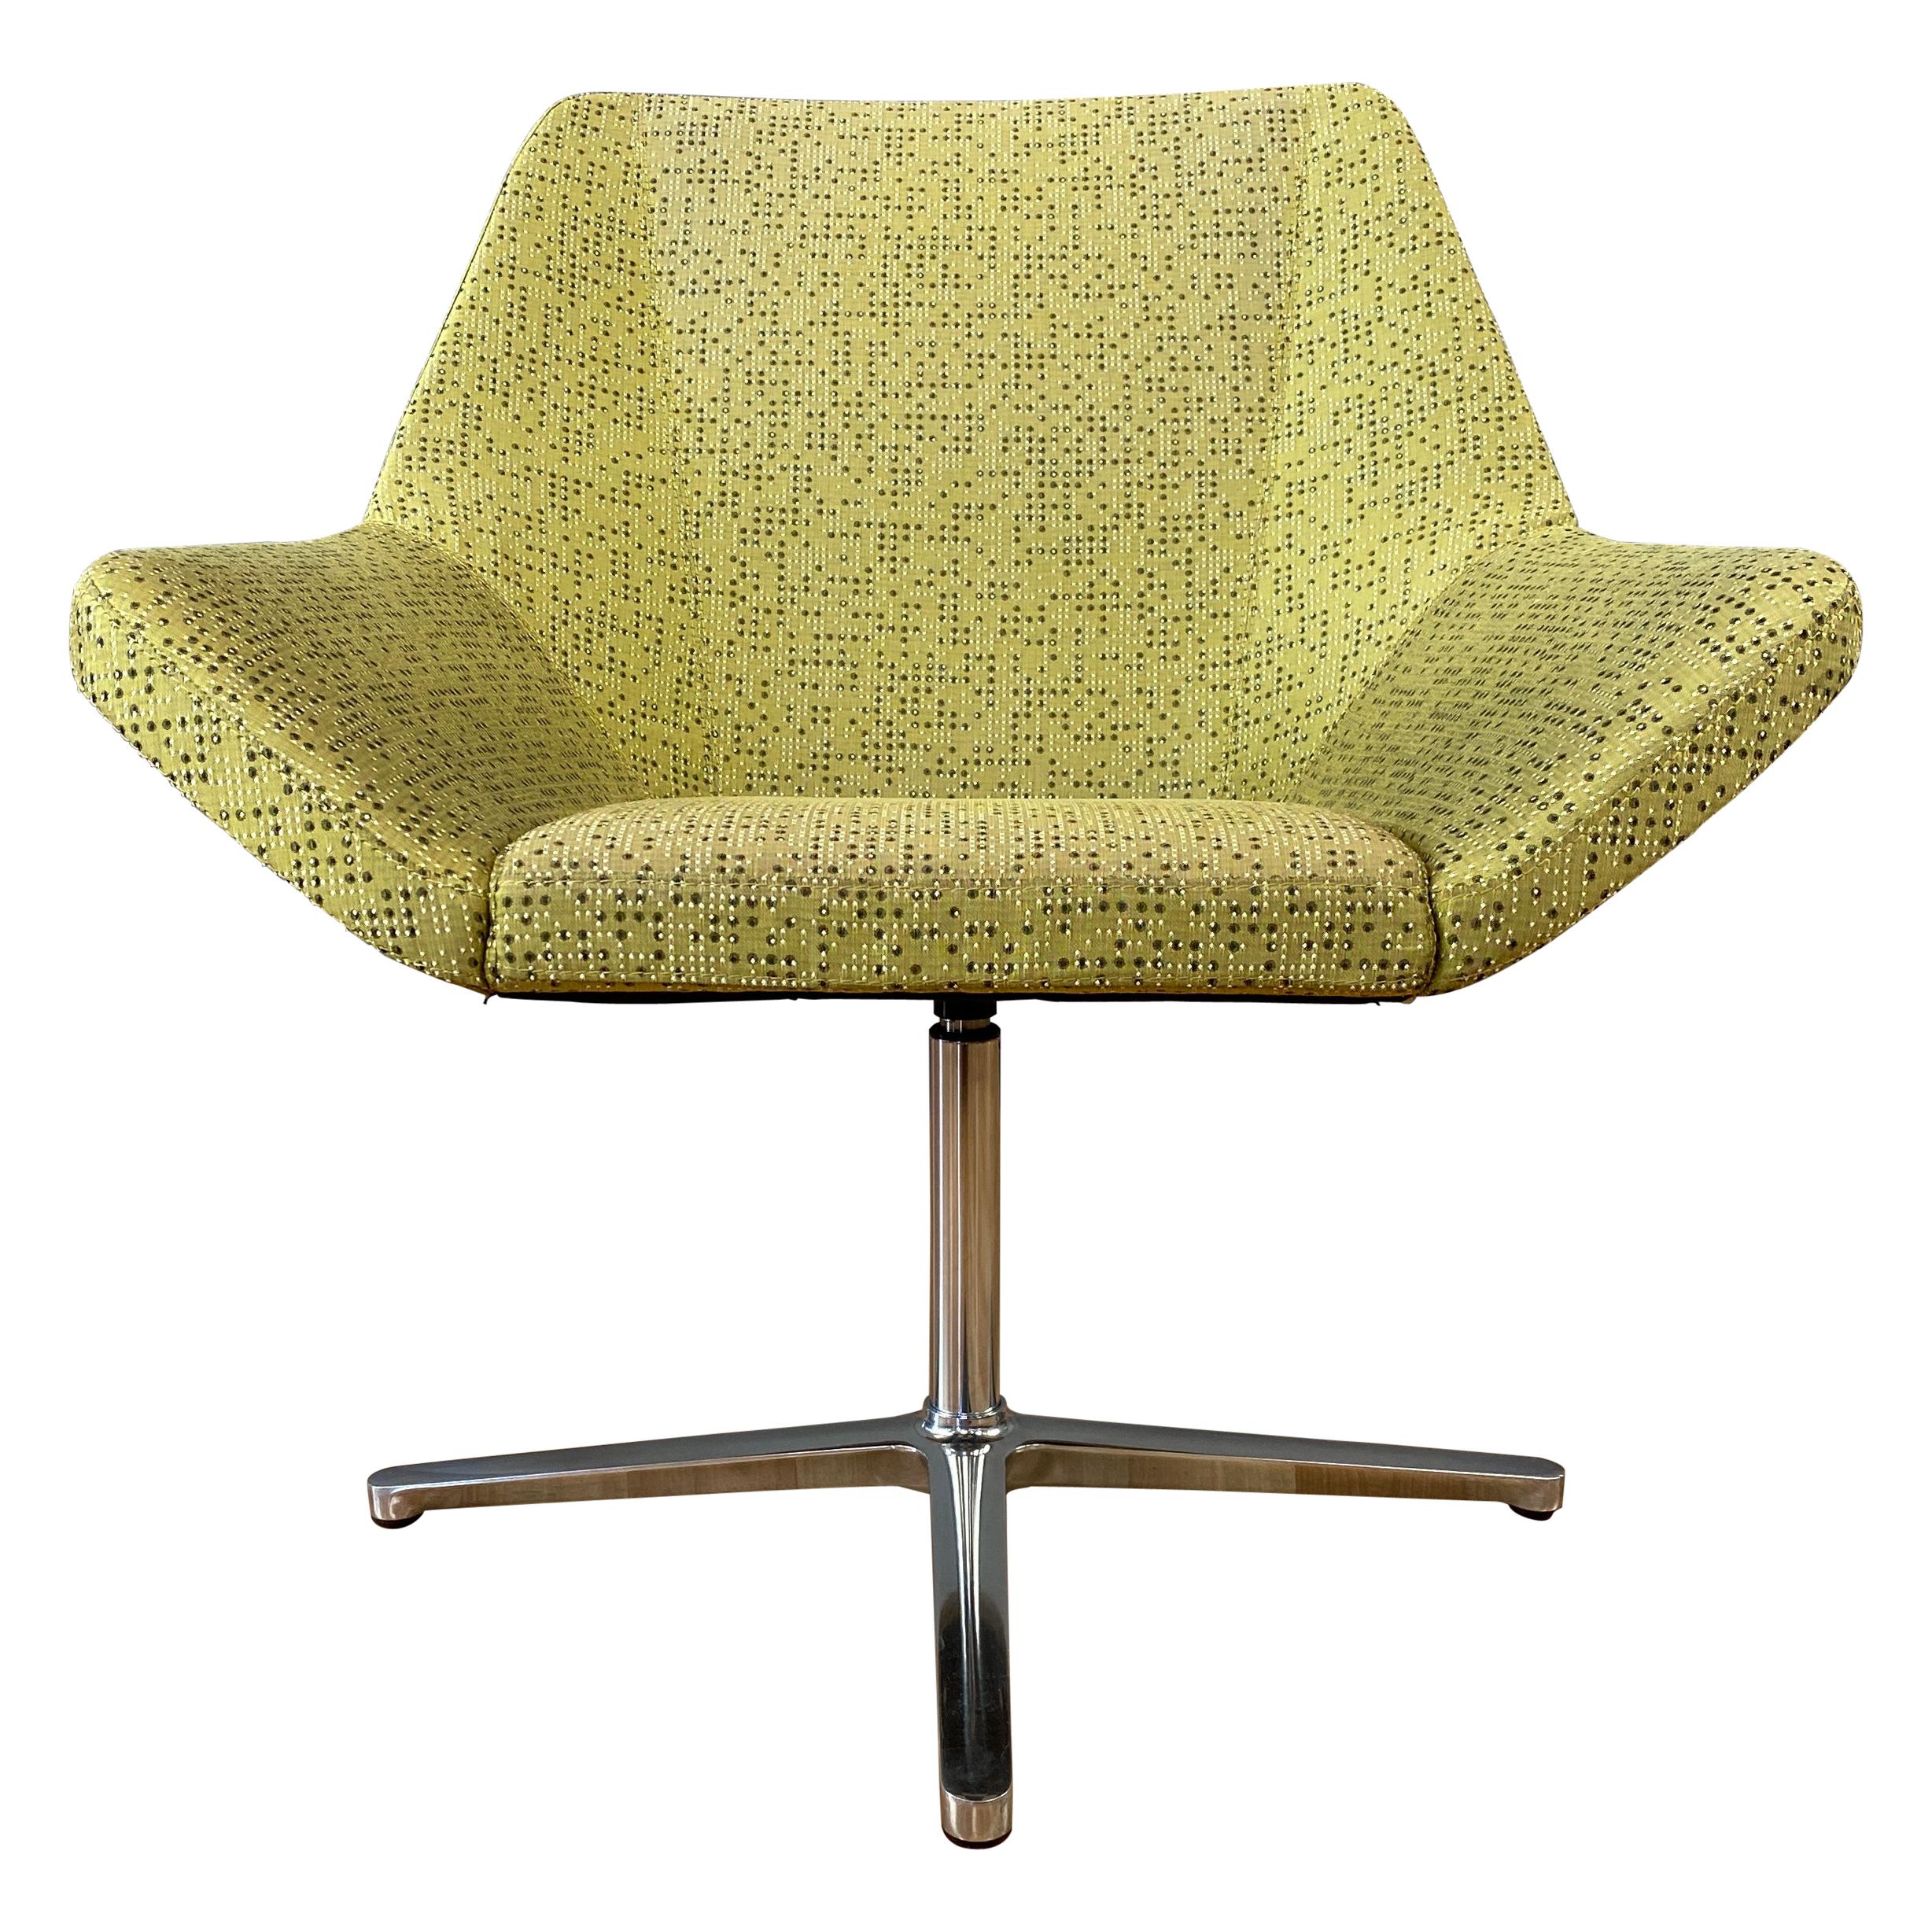 EOOS Designed Cahoots Relax Chair for Keilhauer in Chartreuse B